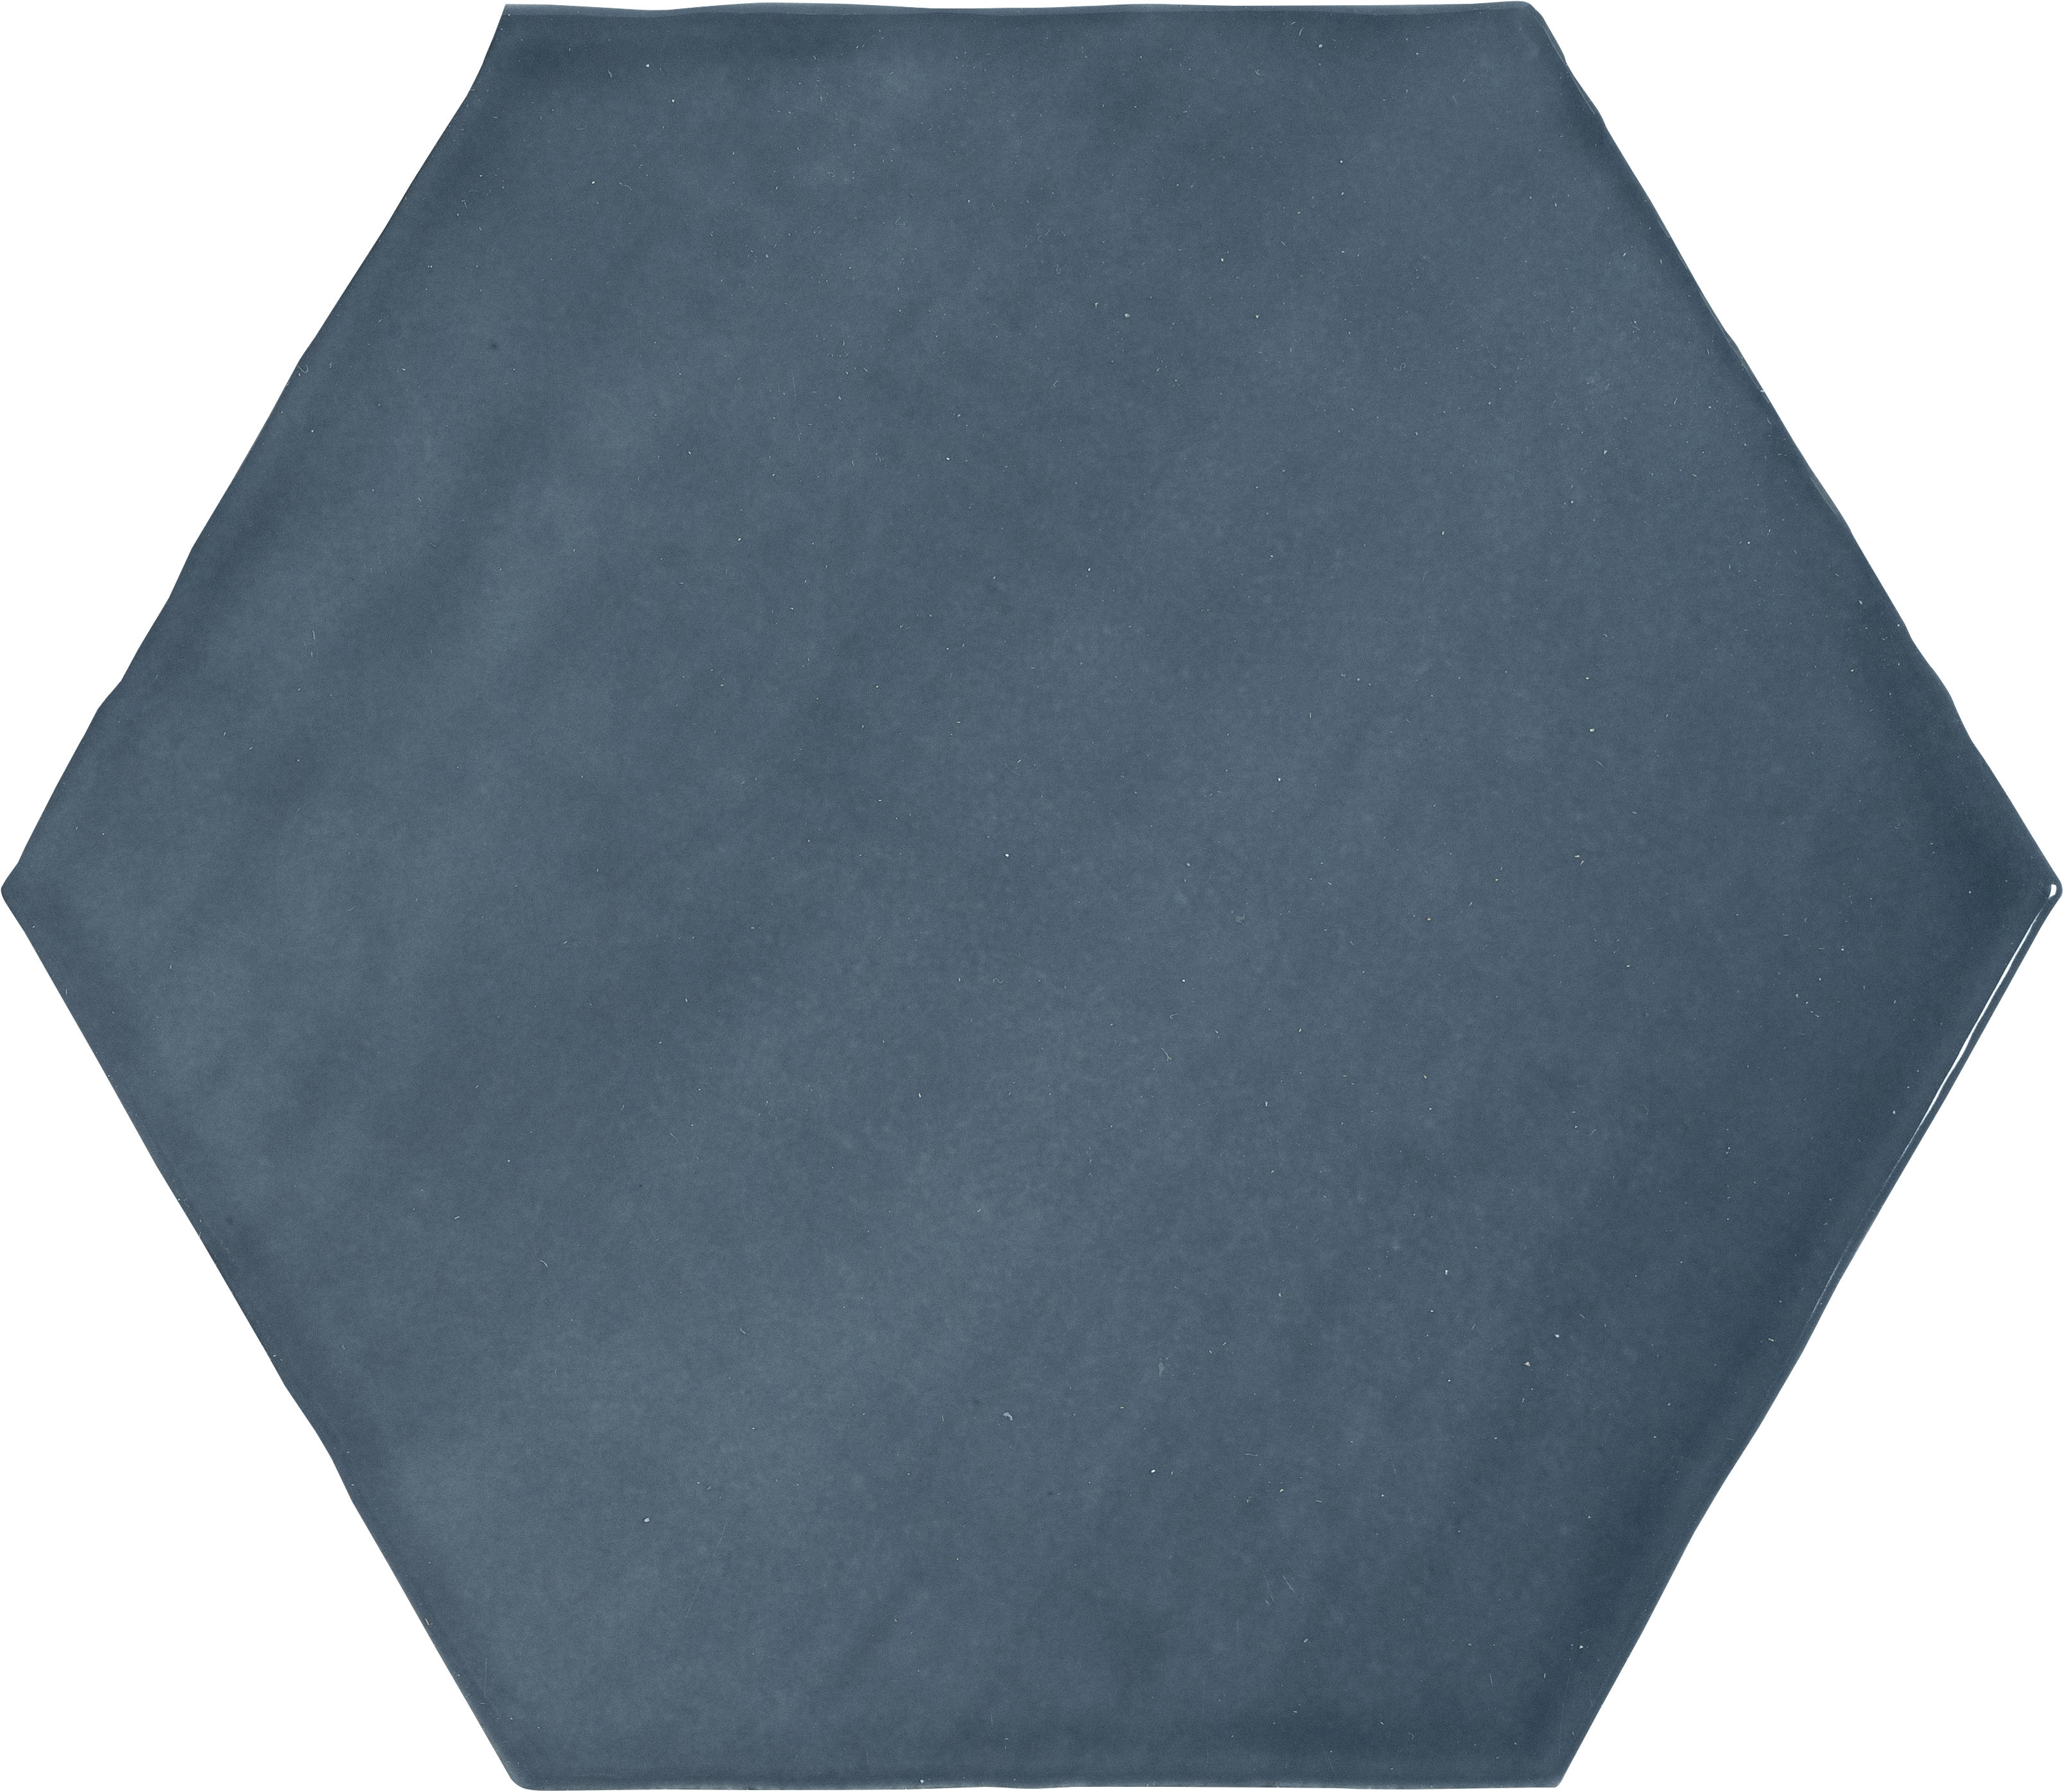 ink pattern glazed ceramic field tile from teramoda anatolia collection distributed by surface group international glossy finish pressed edge 6-inch hexagon shape